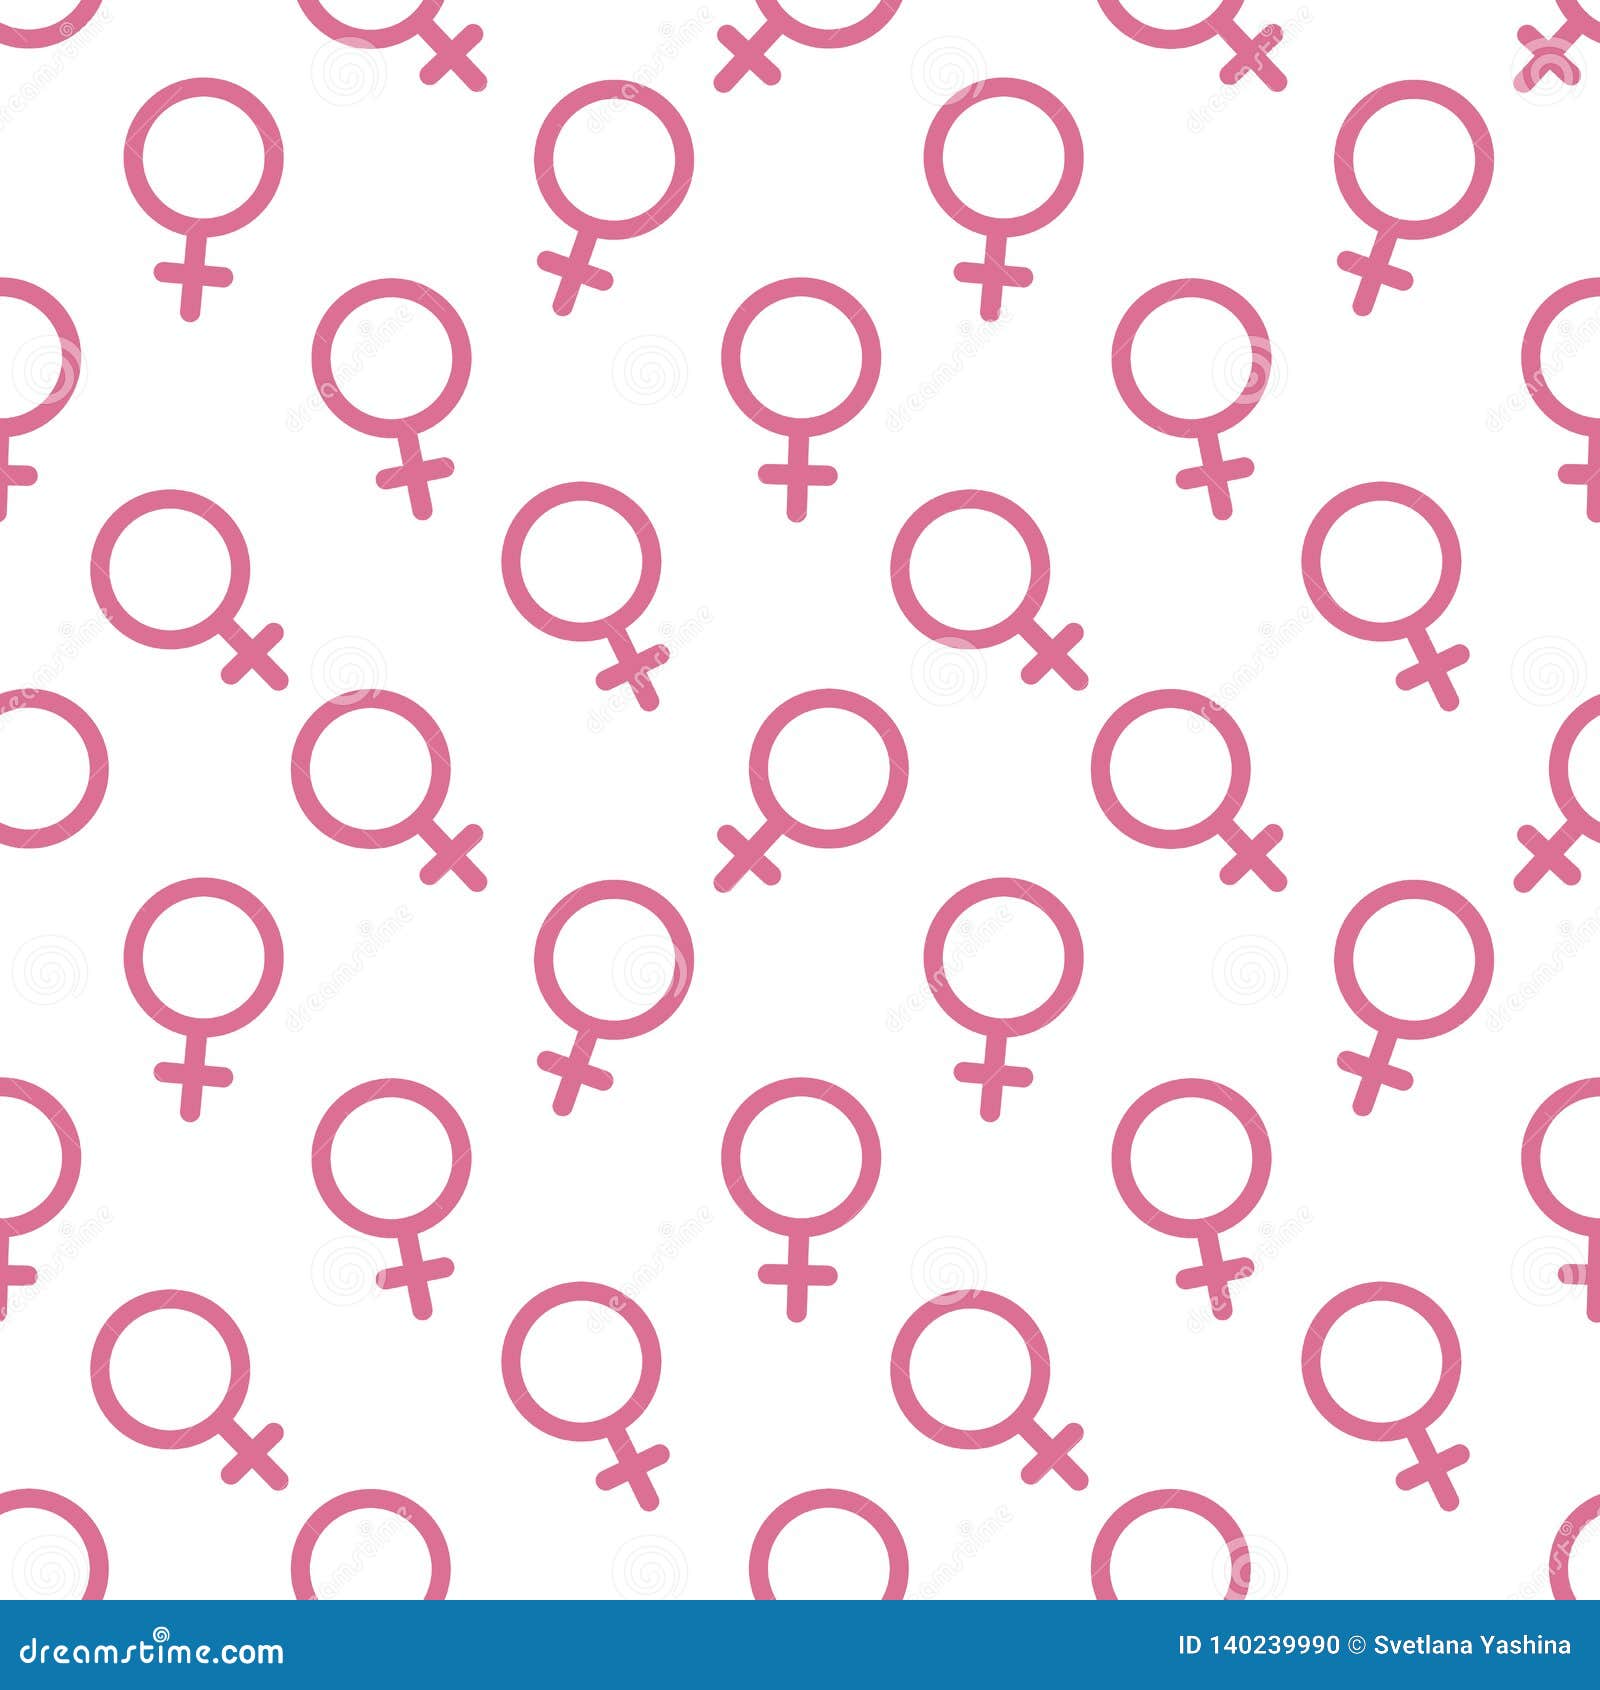 Female Sex Symbol Icon Seamless Pattern Vector Background